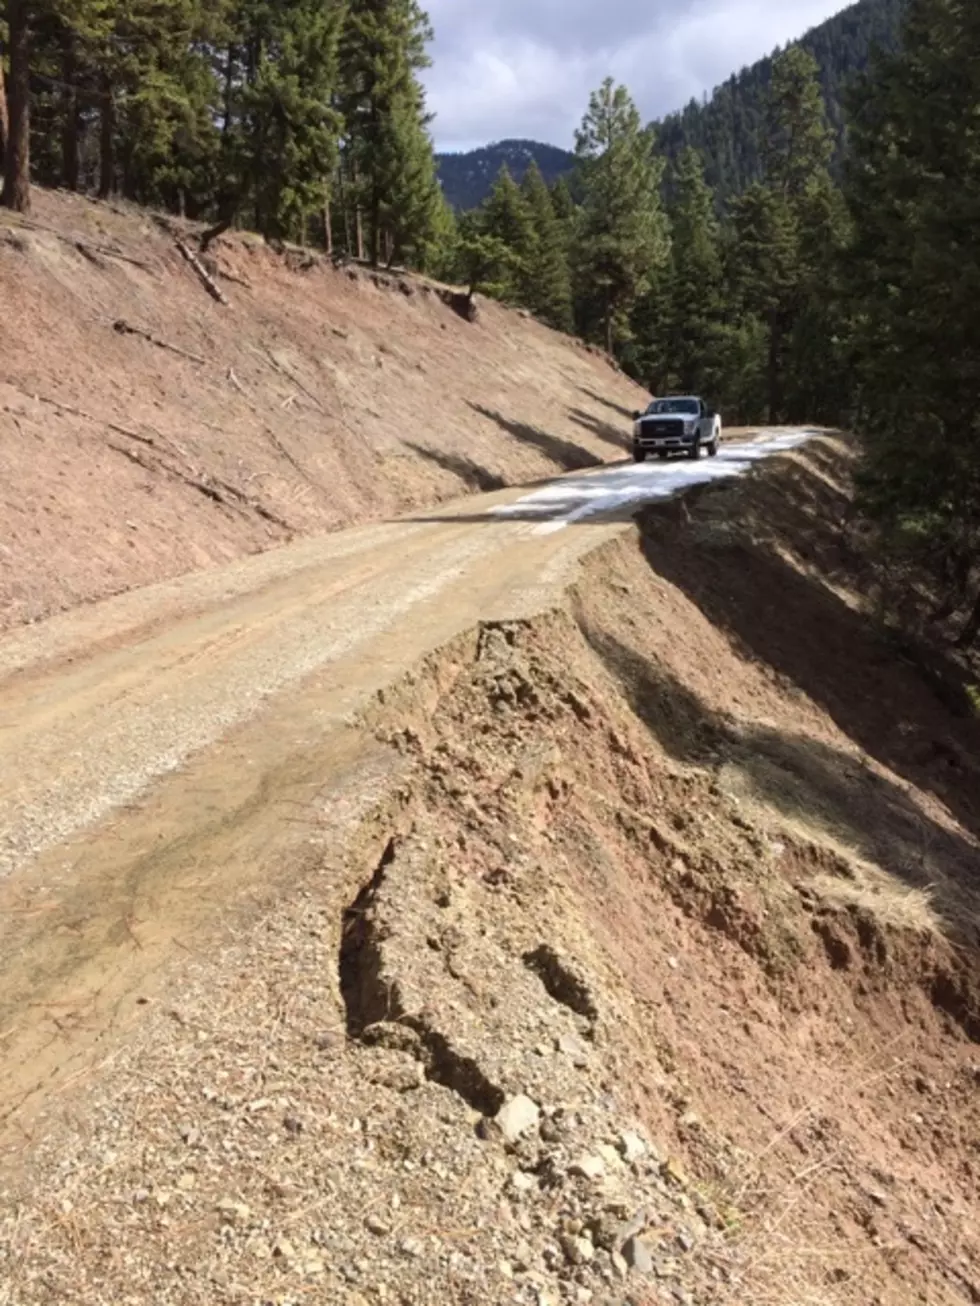 Lolo National Forest warns of soft roadways, soils as snow melts